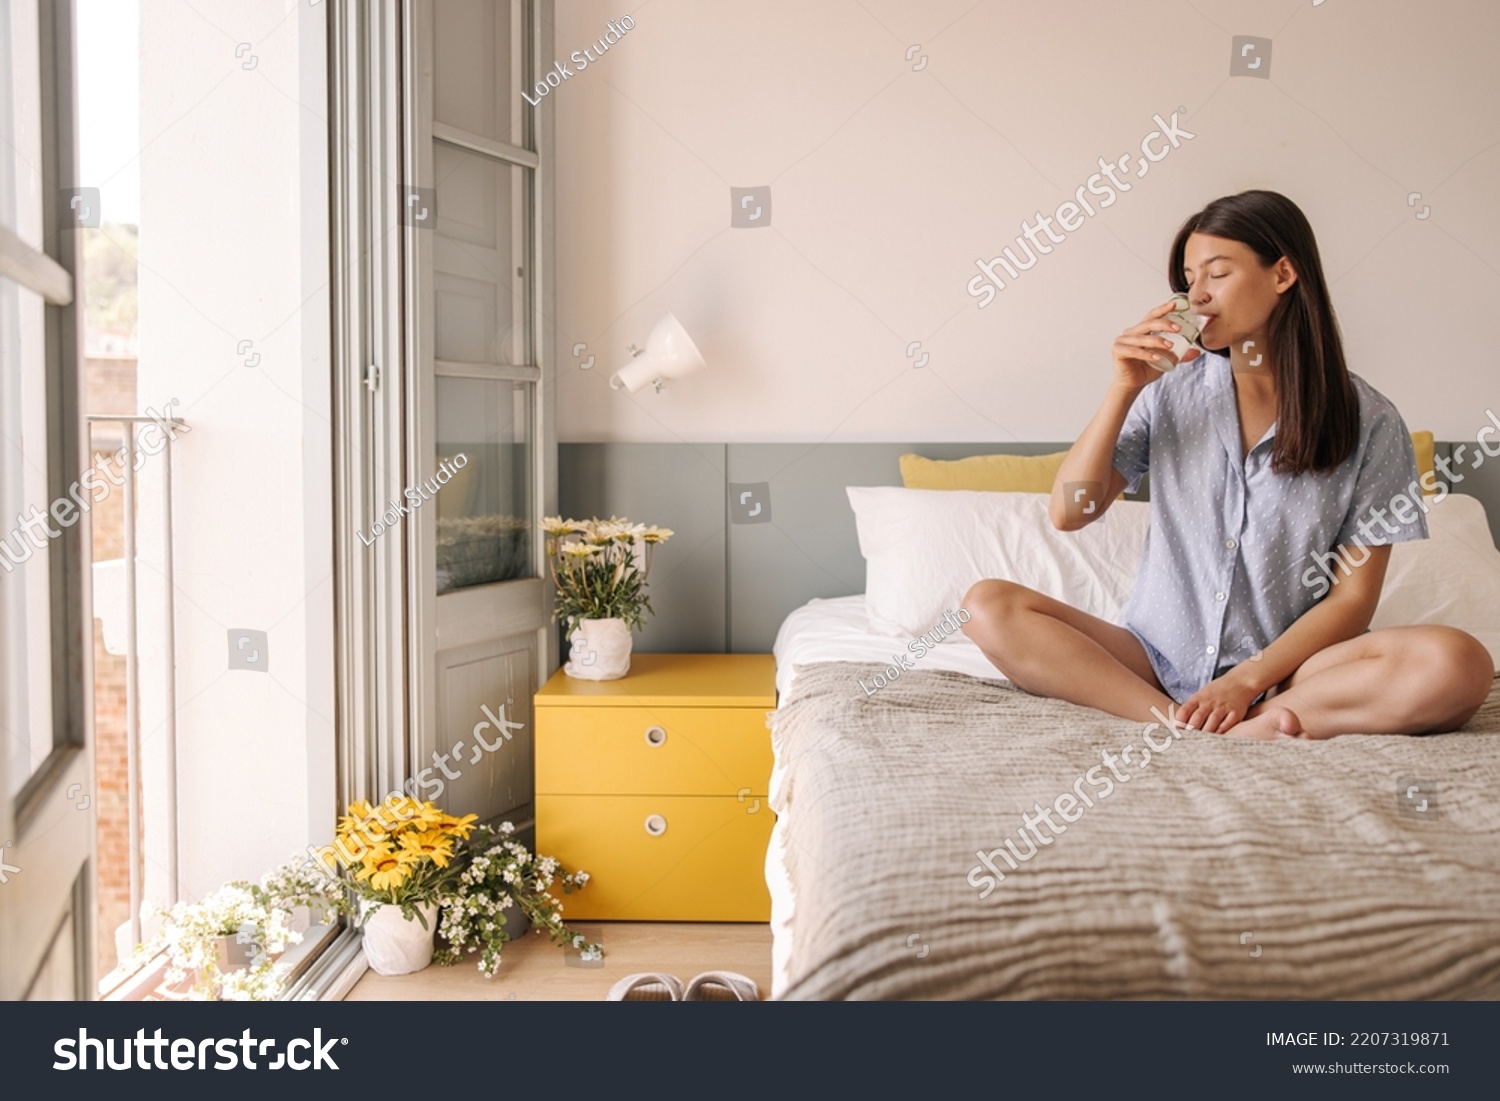 Nice young caucasian girl drinks water, crossing legs sitting on bed in room. Woman with brunette hair closes her eyes in pleasure. Good morning concept #2207319871